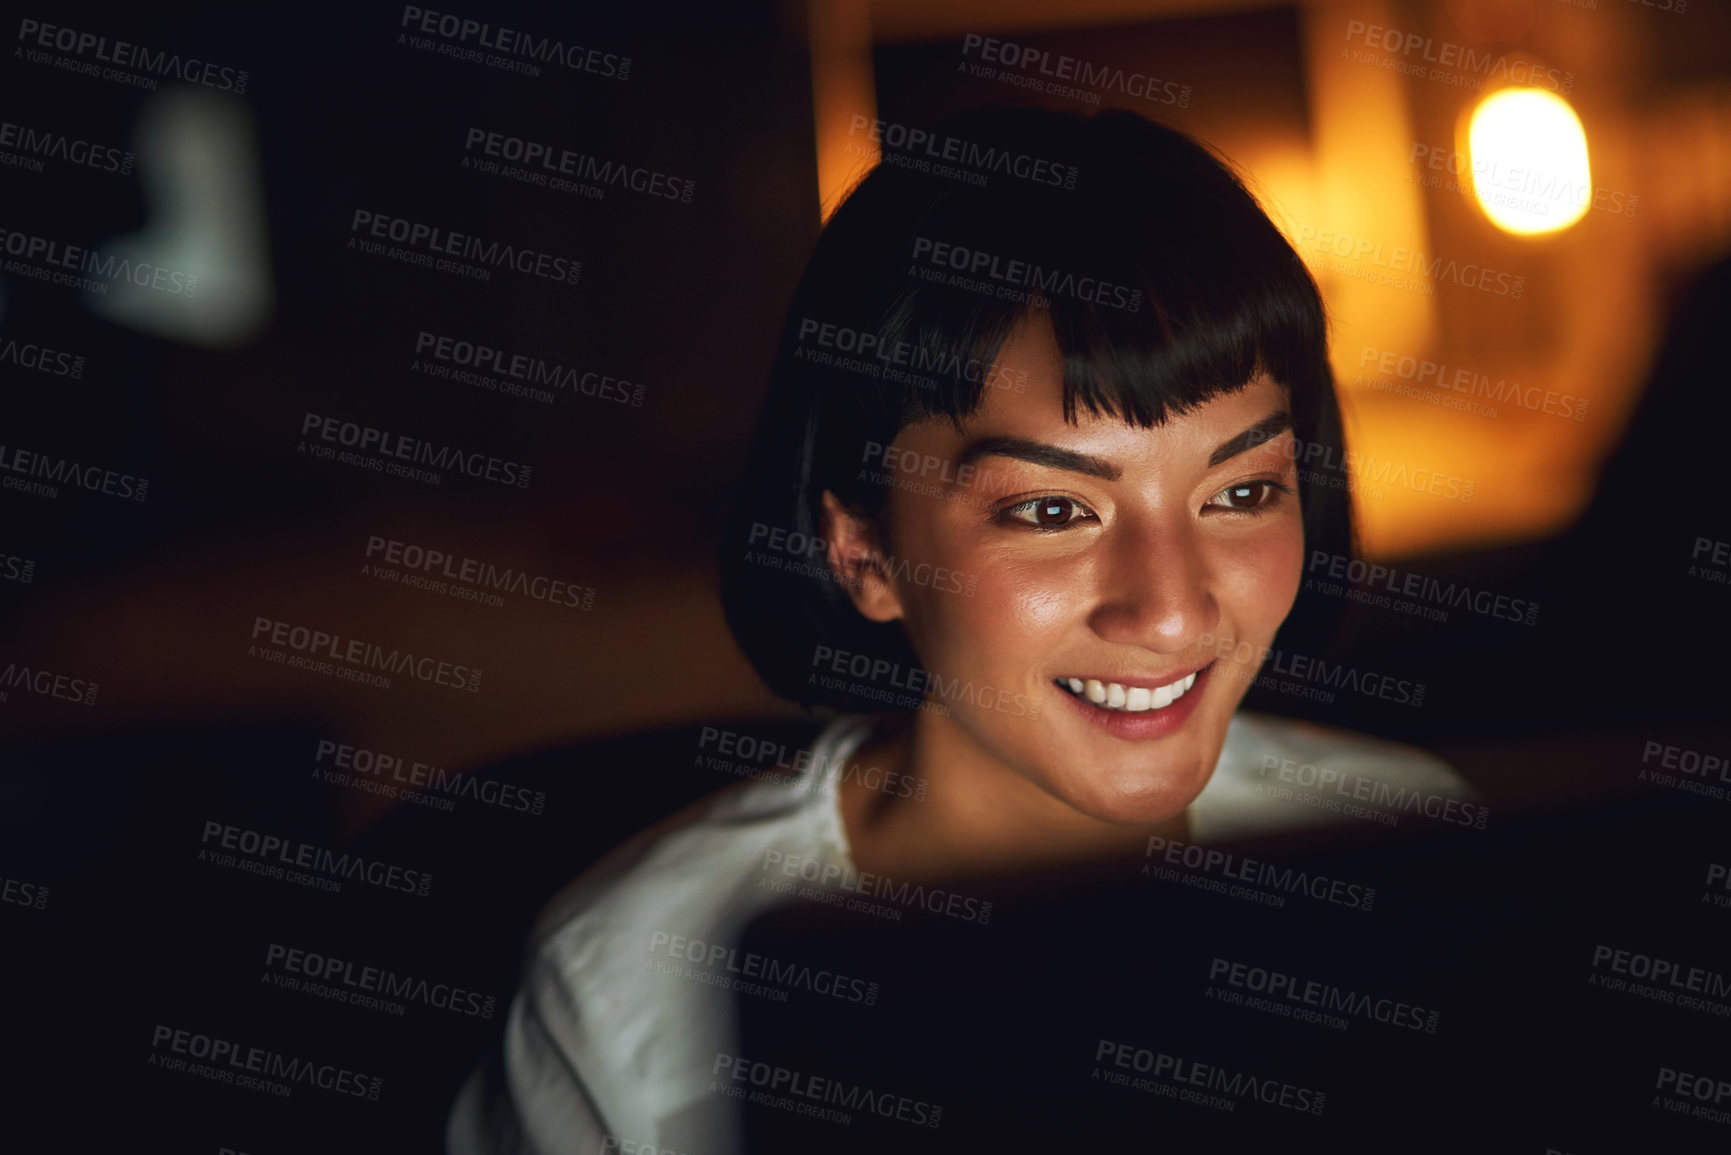 Buy stock photo Shot of a young businesswoman using a computer during a late night at work